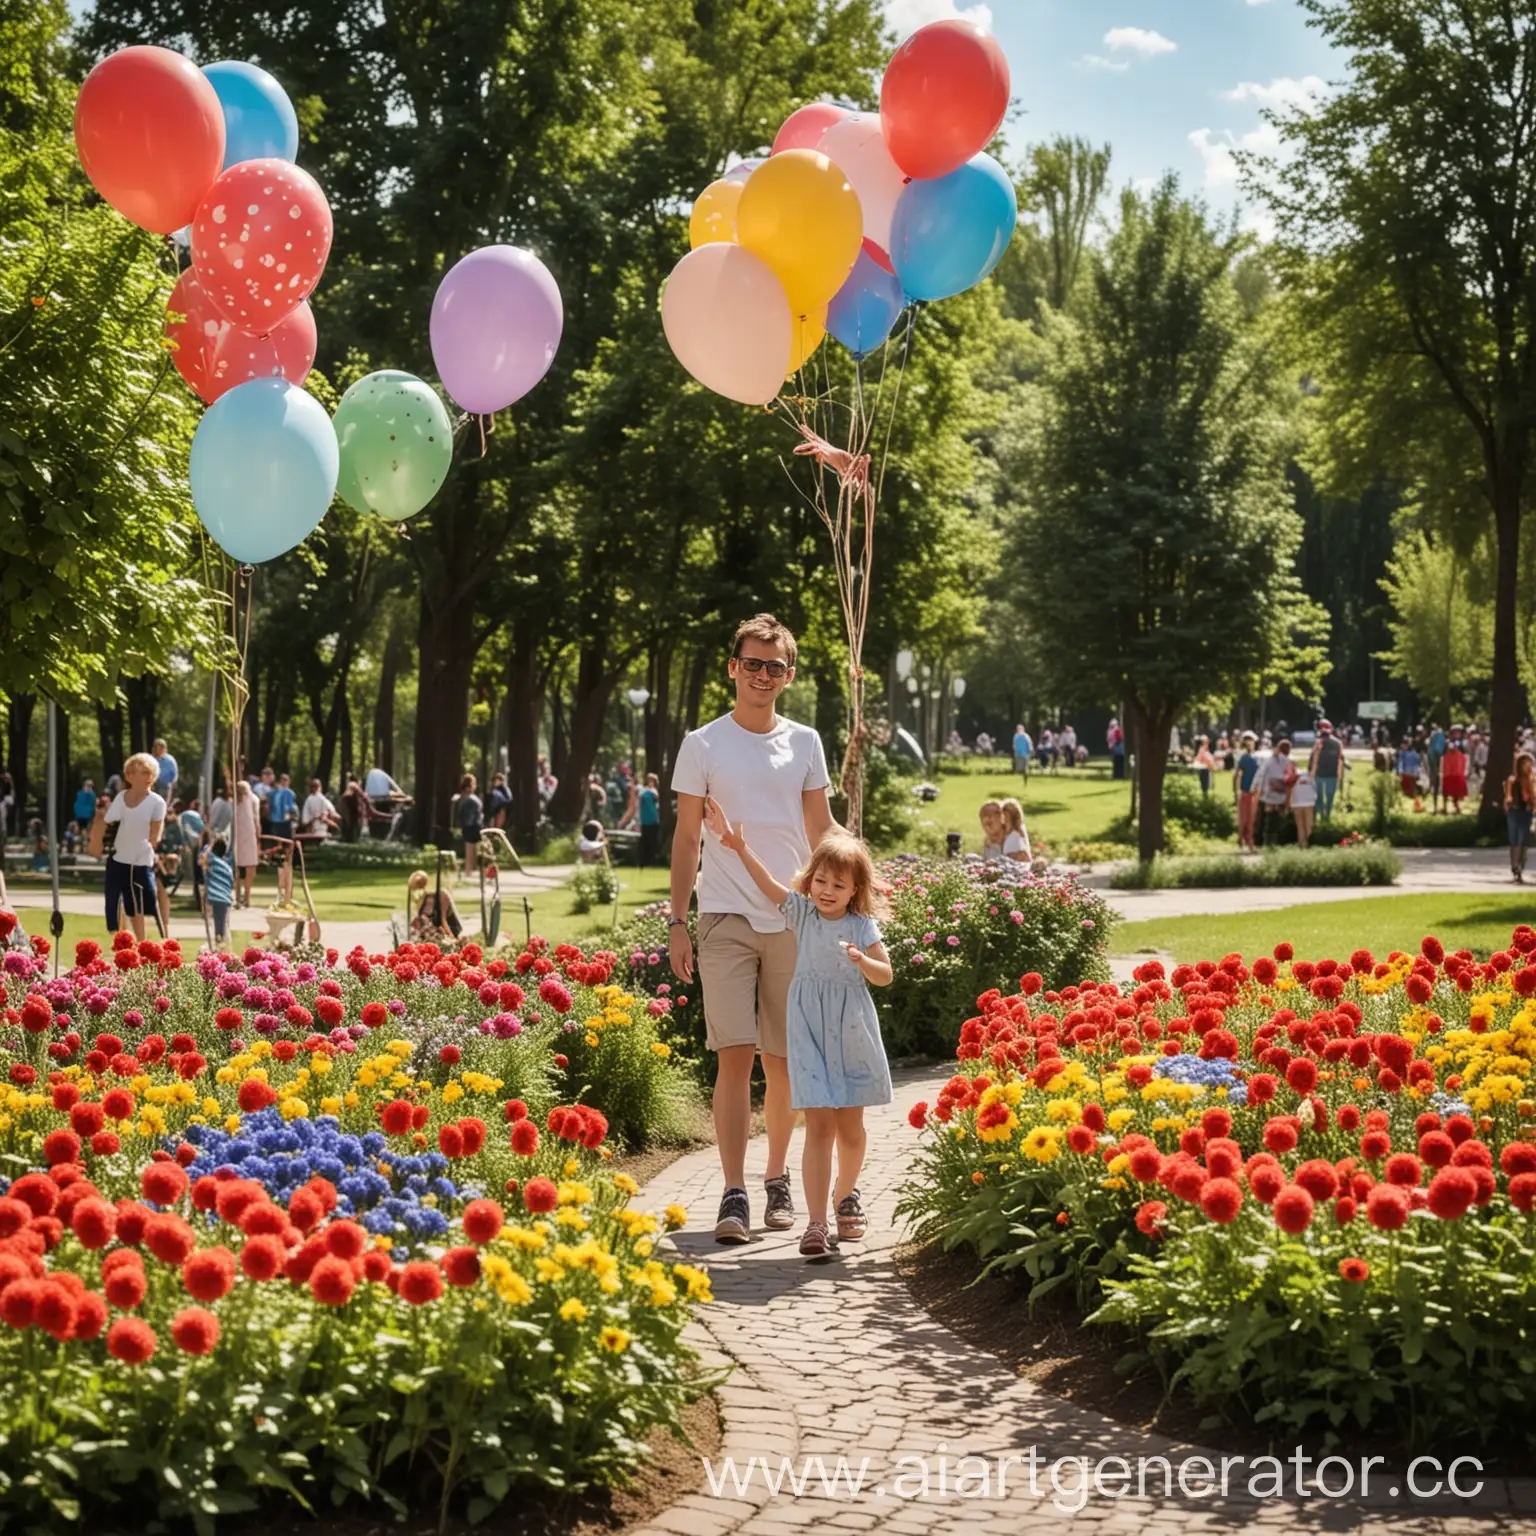 Happy-Parents-and-Children-with-Balloons-in-Sunny-Park-Russia